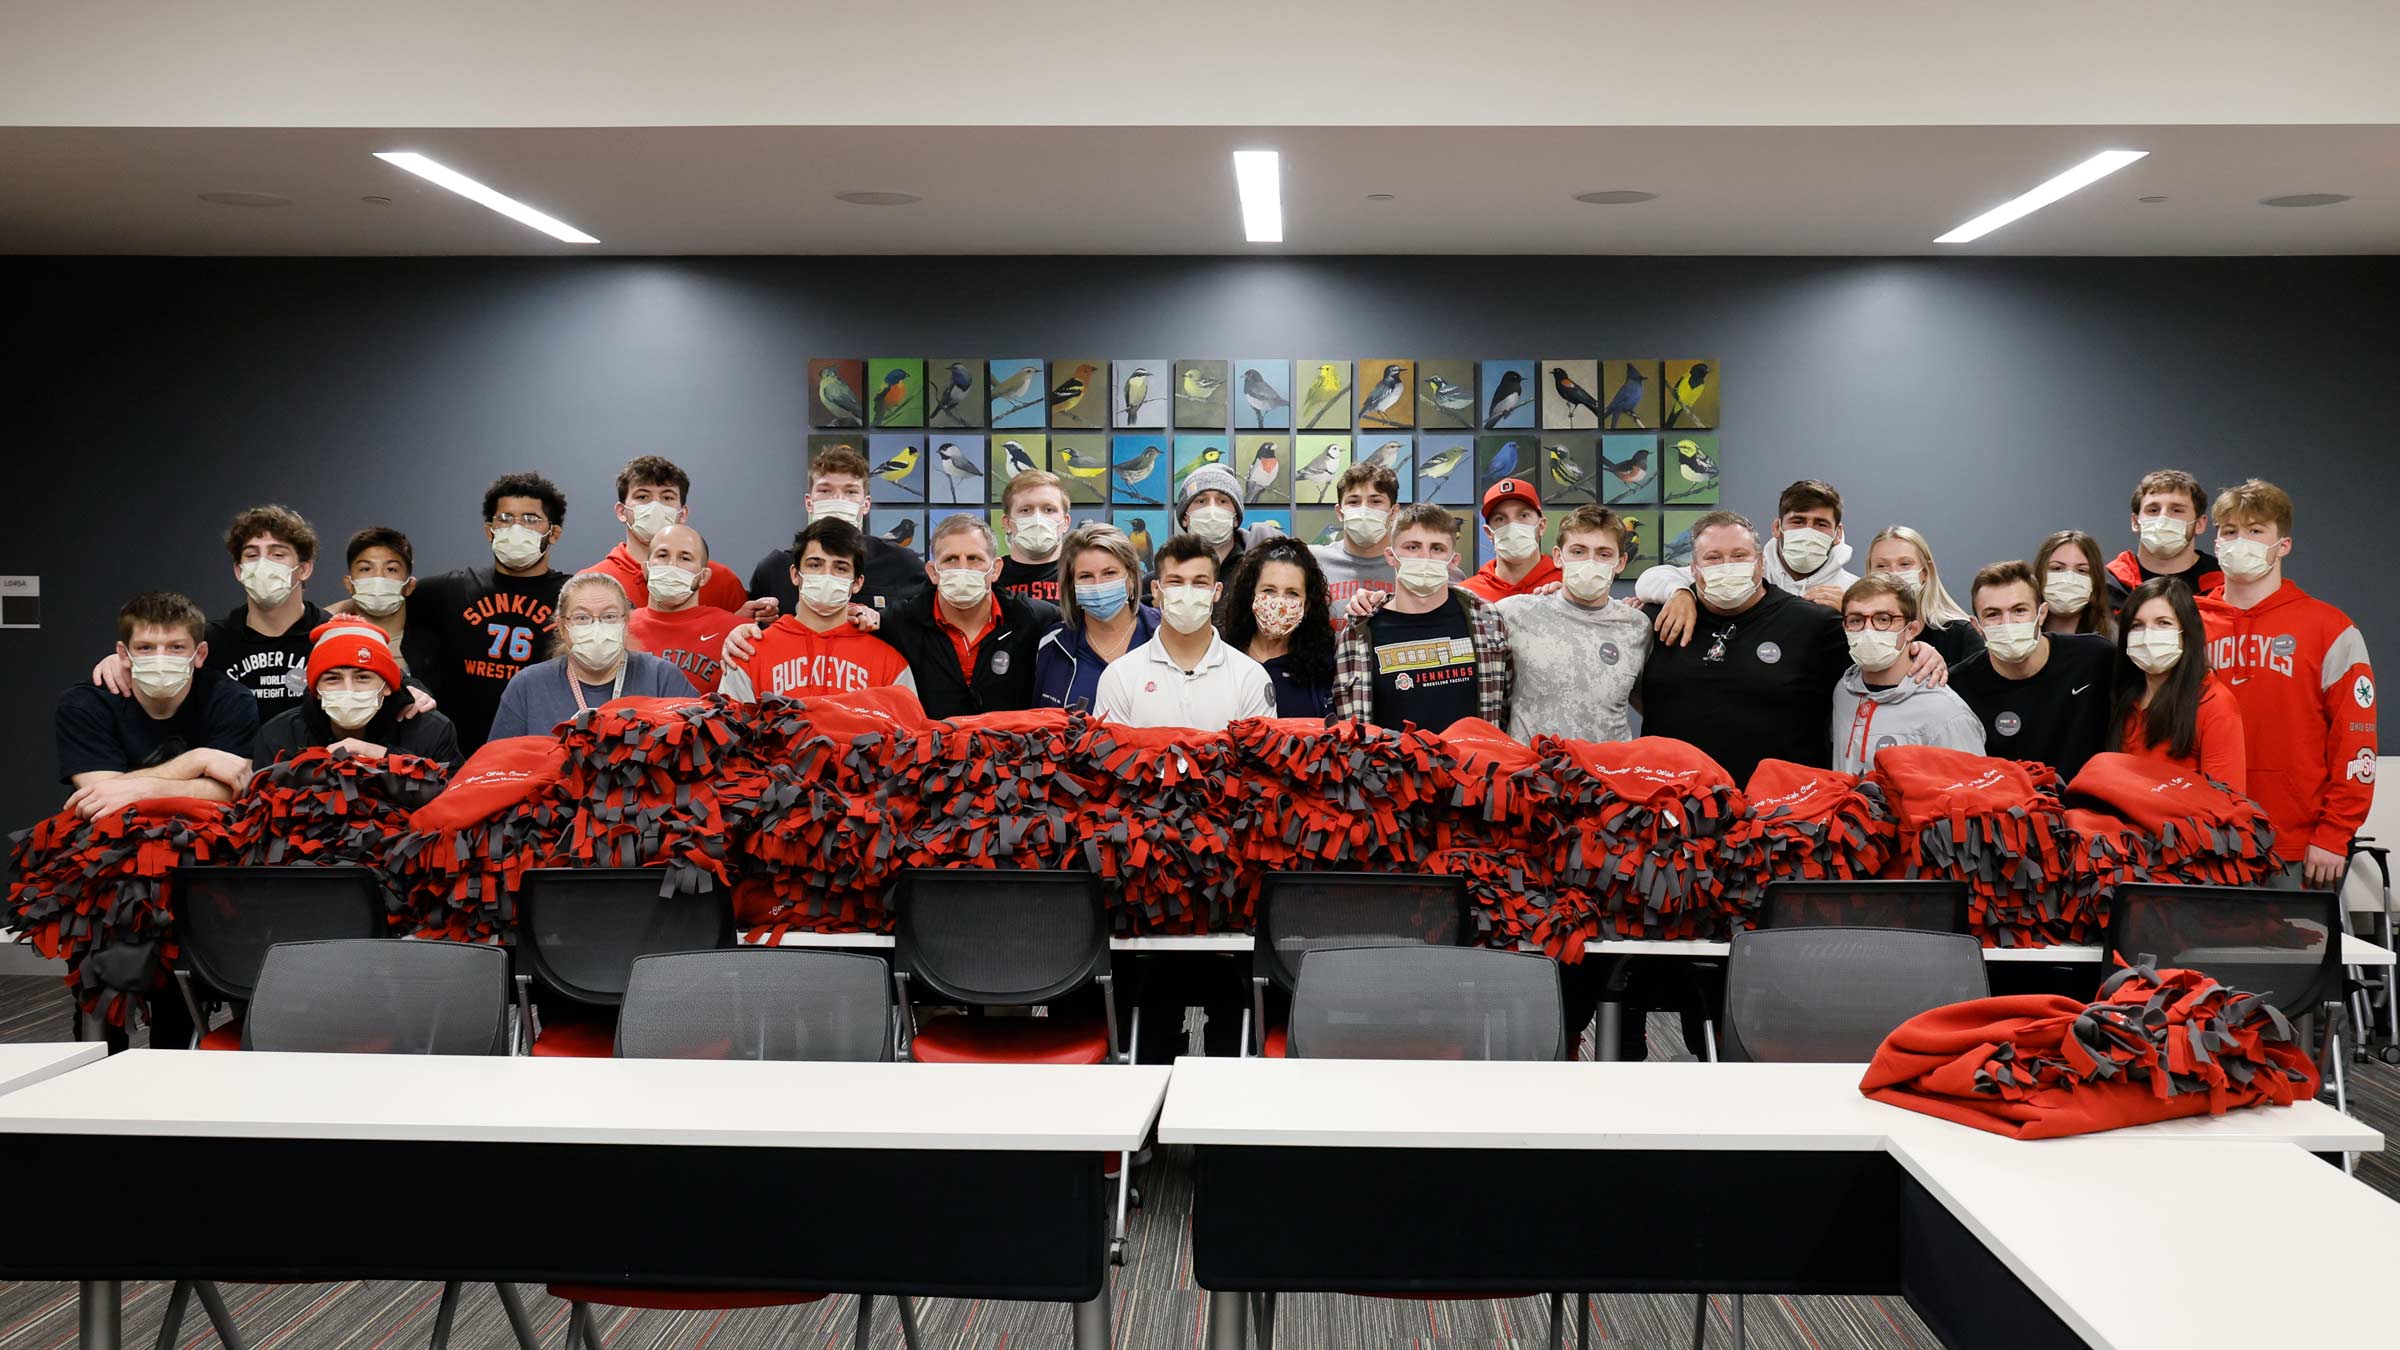 Members of The Ohio State University wrestling team show off the nearly 80 blankets that they made.